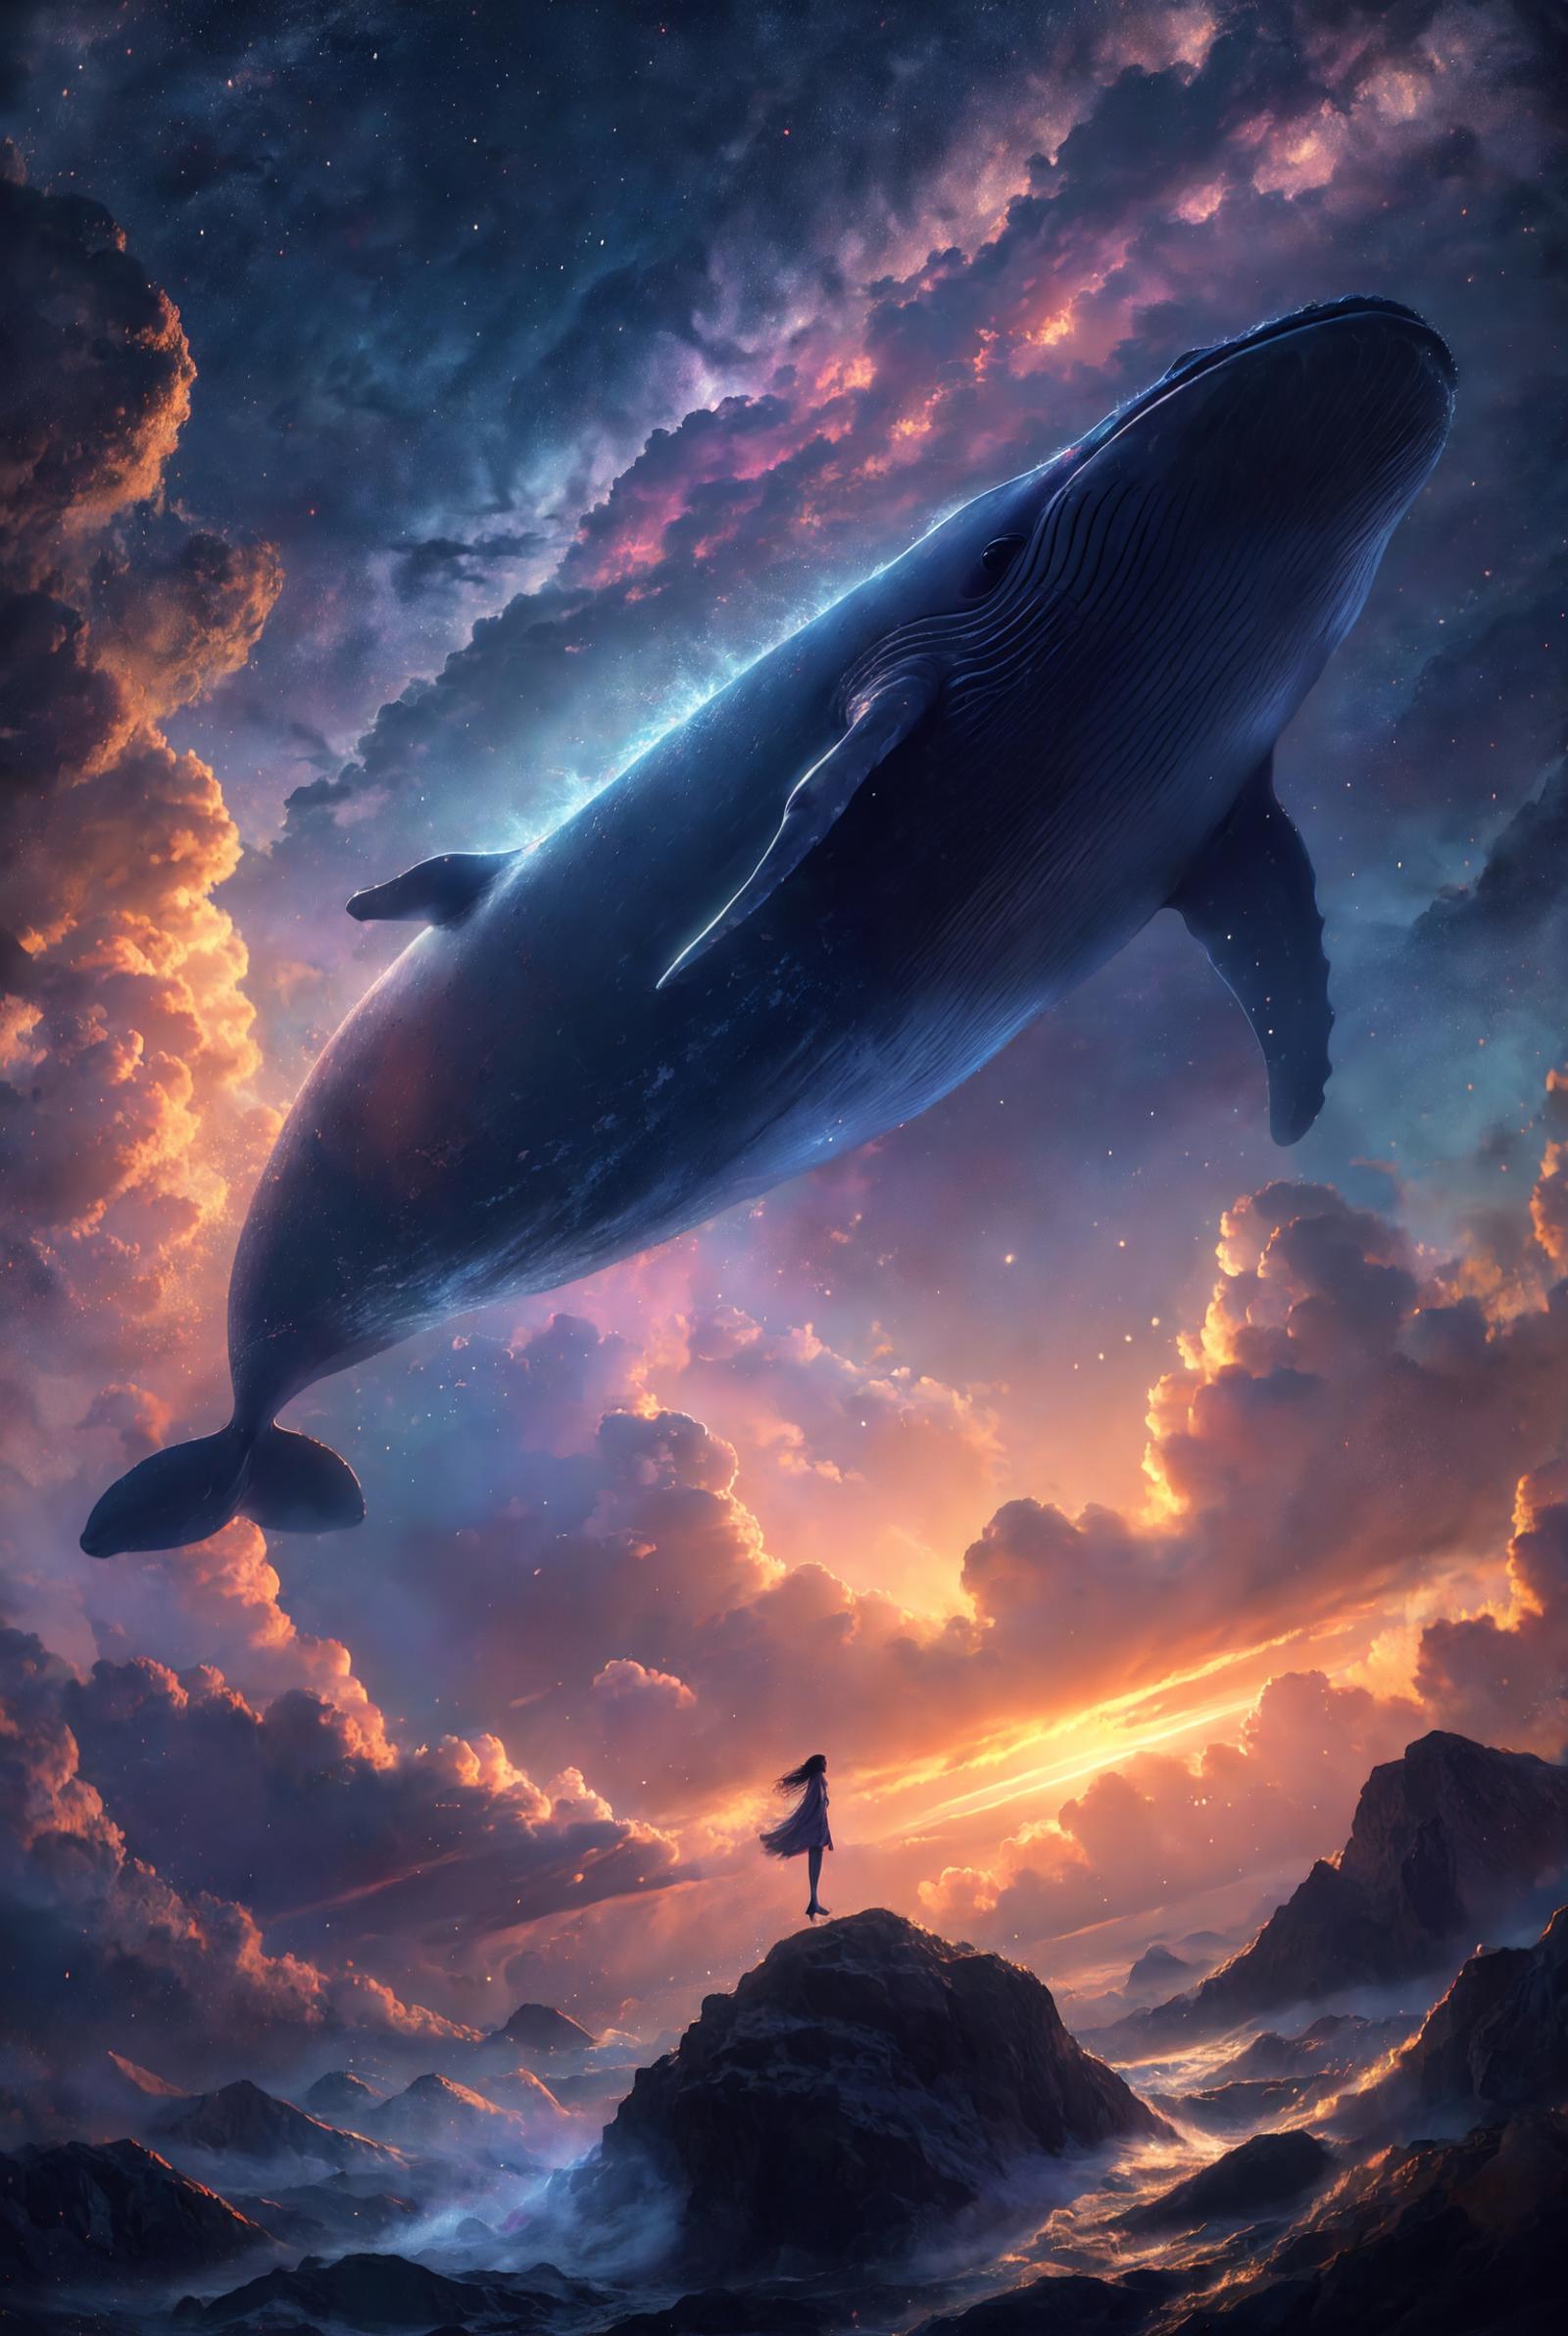 A woman standing on a cliff with a large whale flying by in an artistic painting.